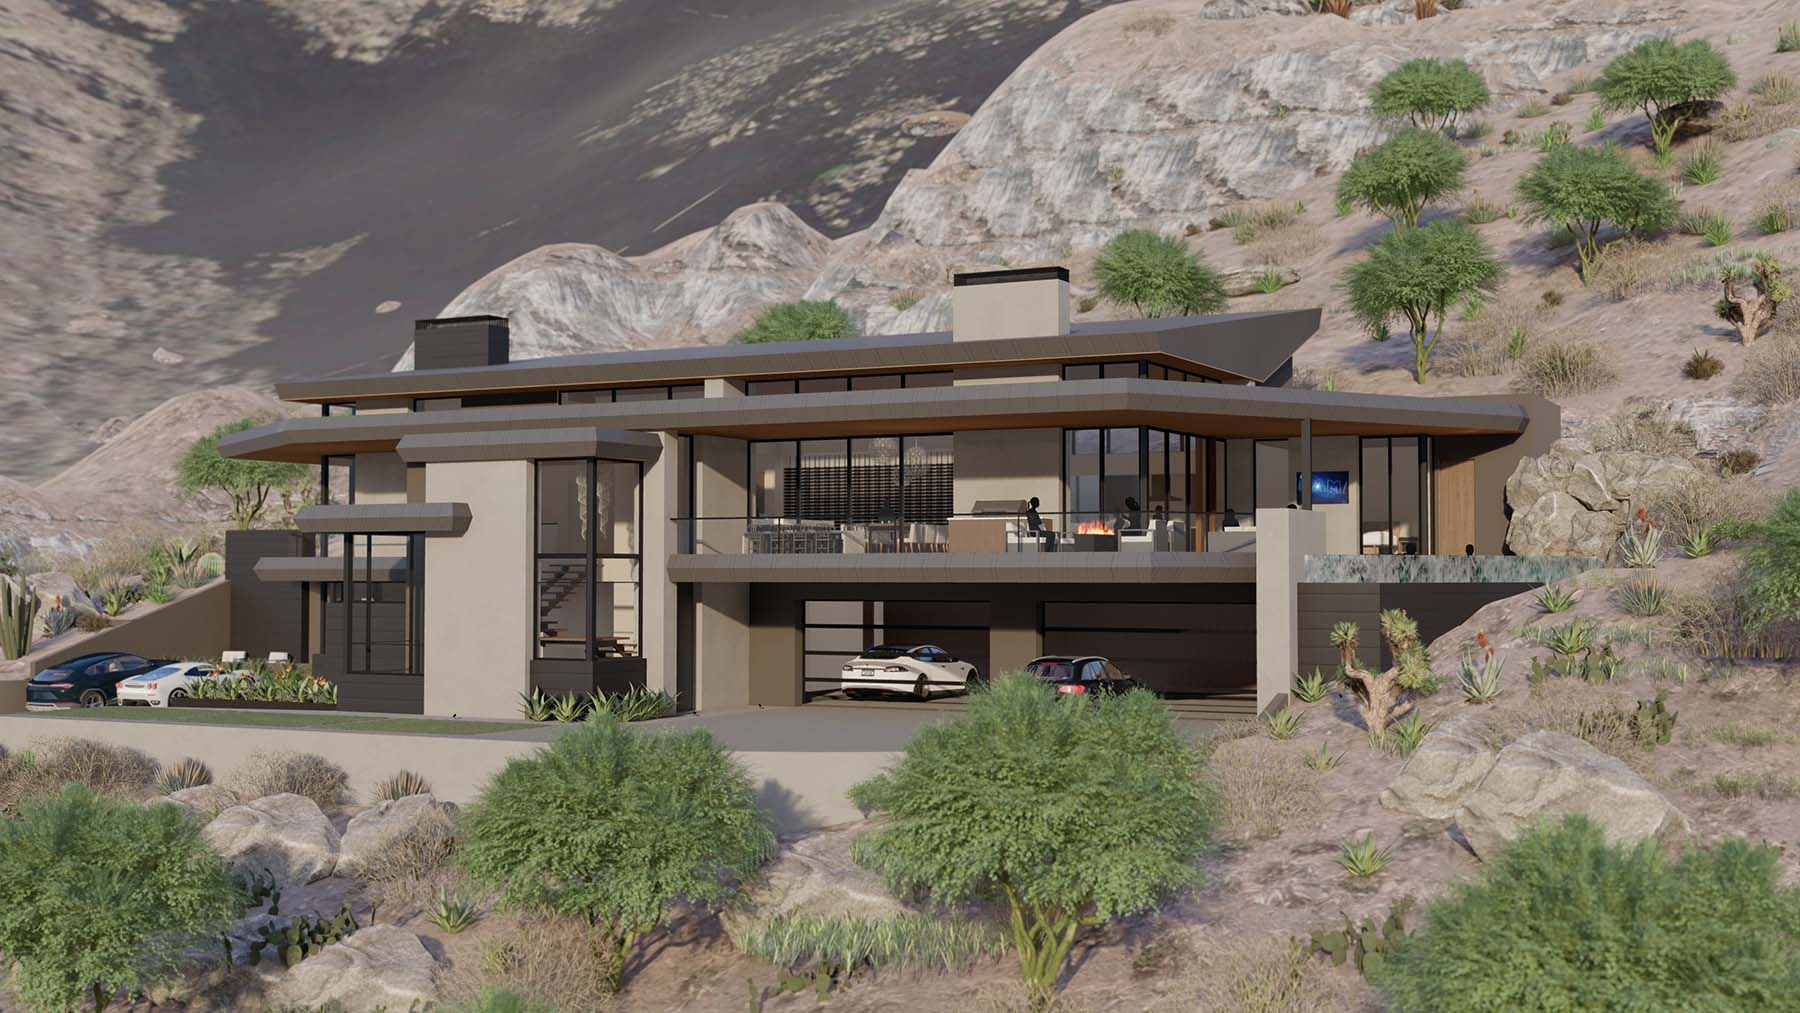 Set into the mountainside, this spec home melds into its setting.